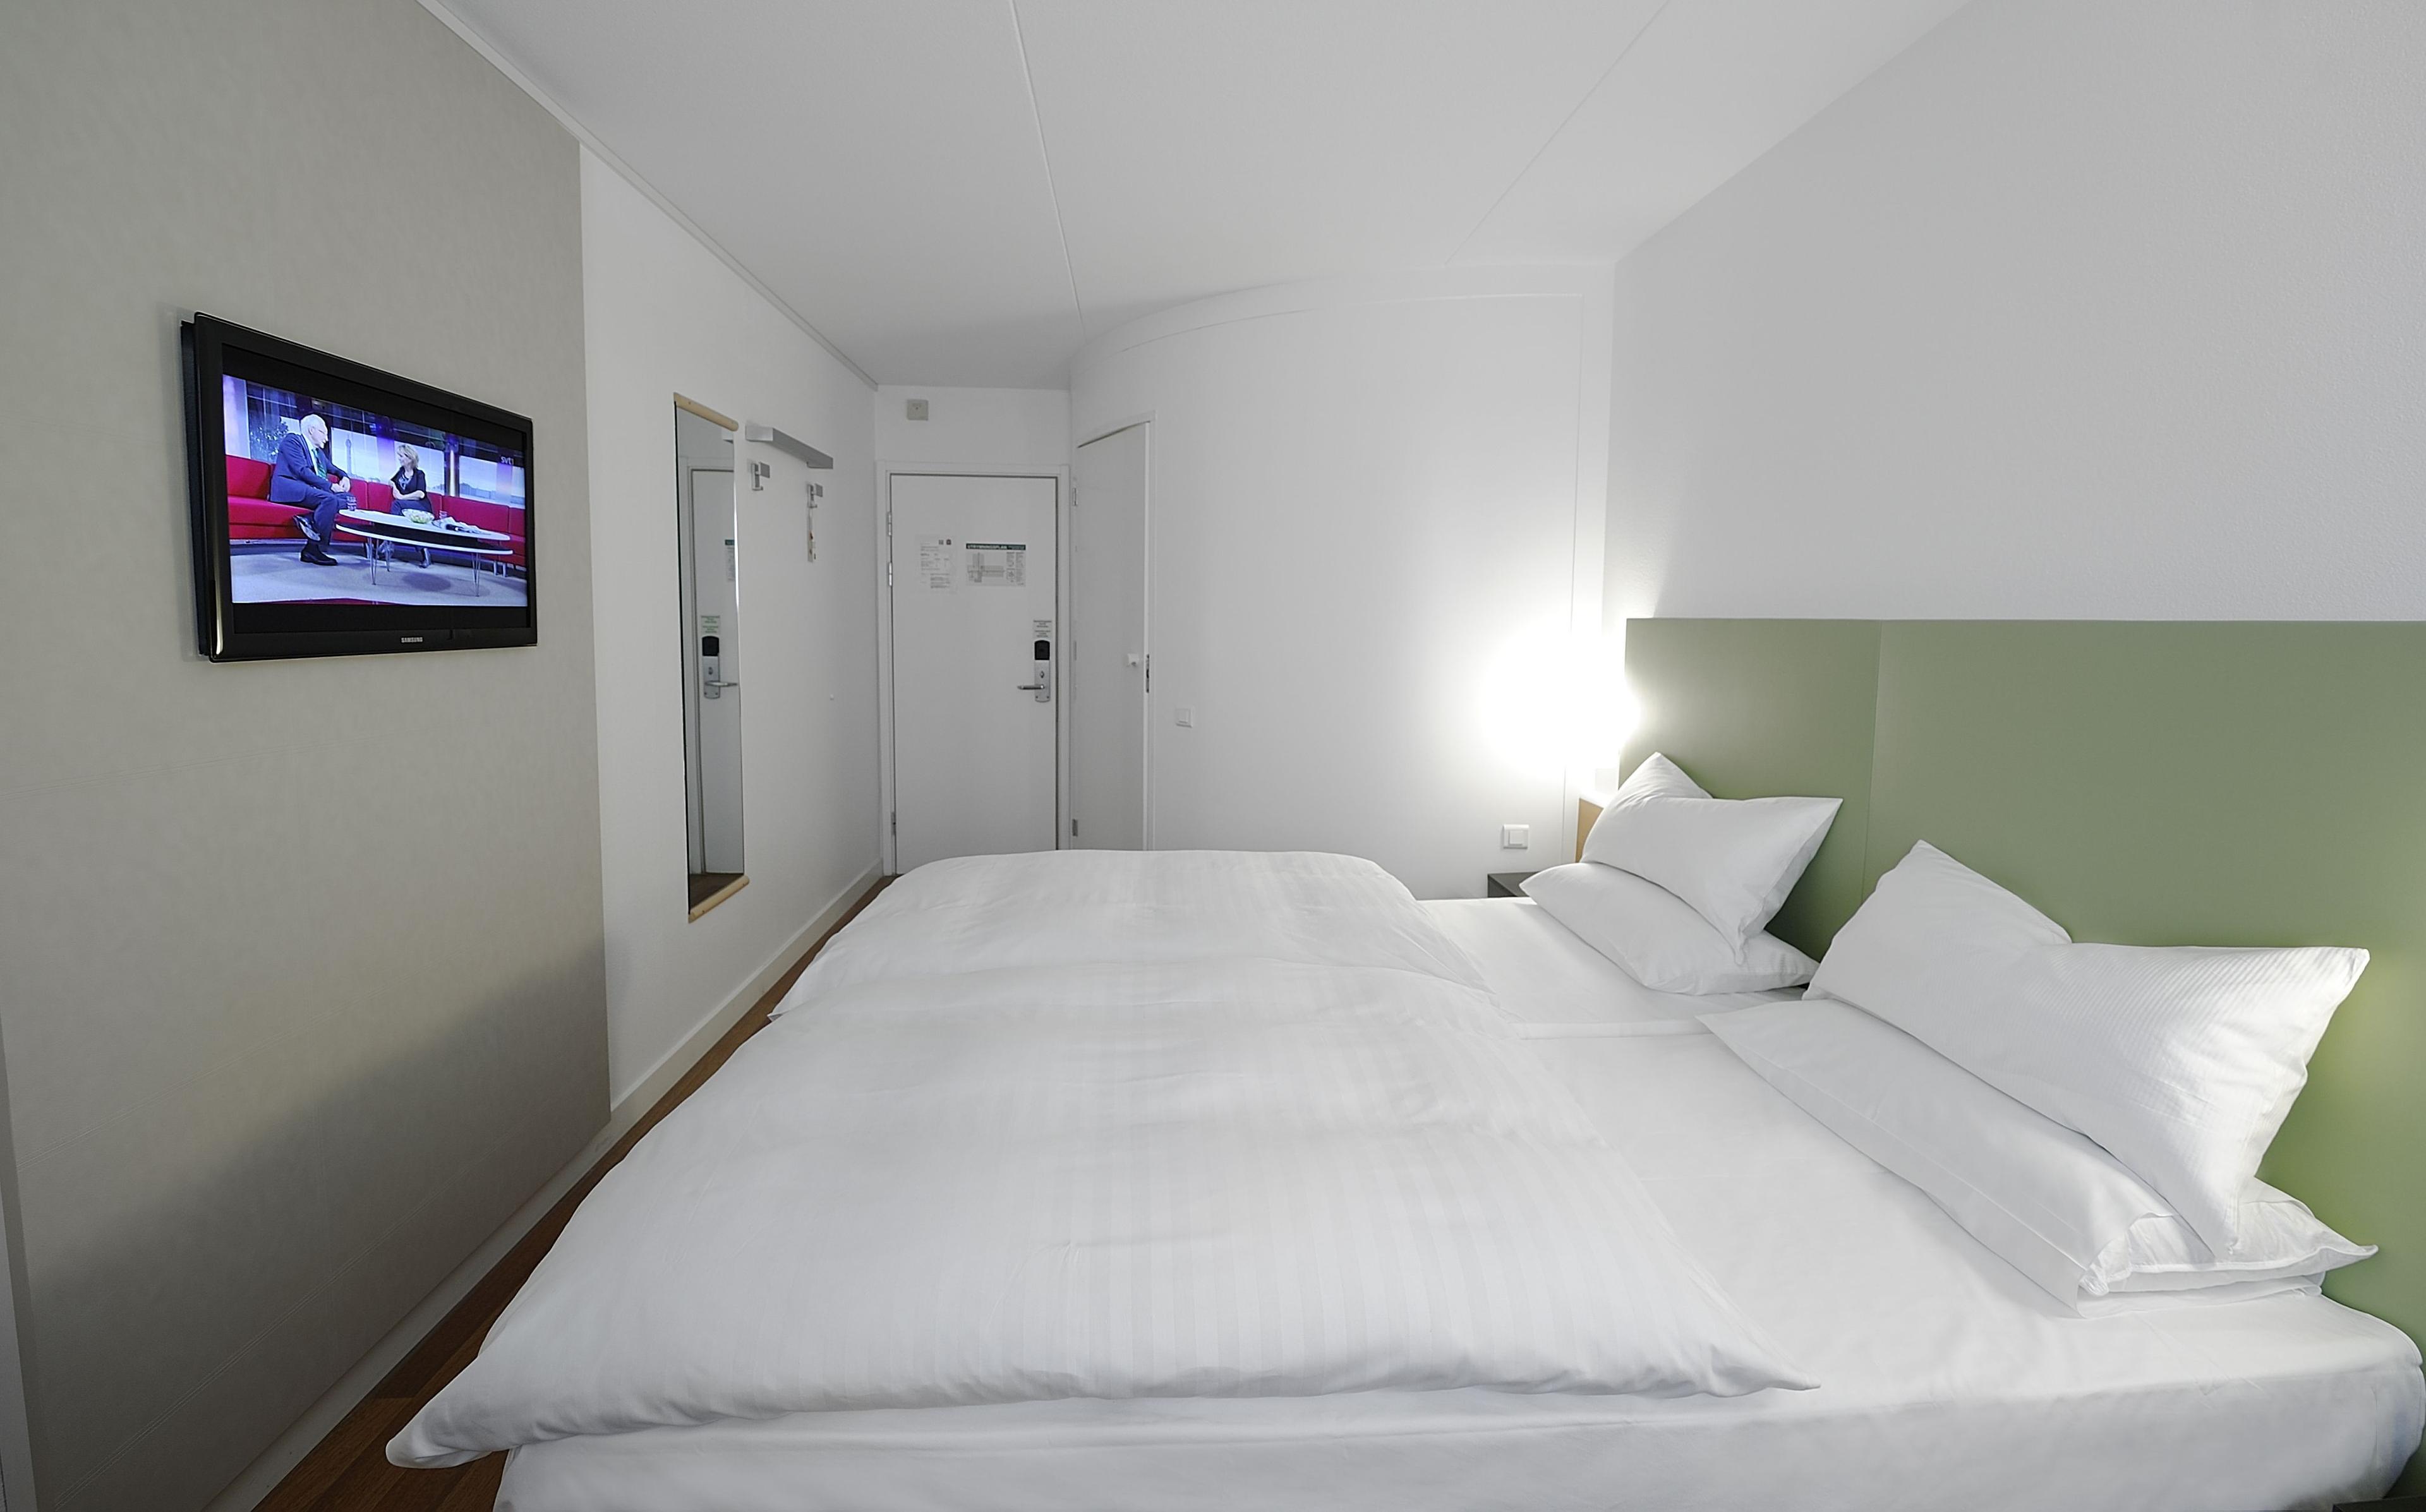 Free WiFi, flatscreen TV, a work area with desk. Beds are 2x90cm . Bathroom with shower.